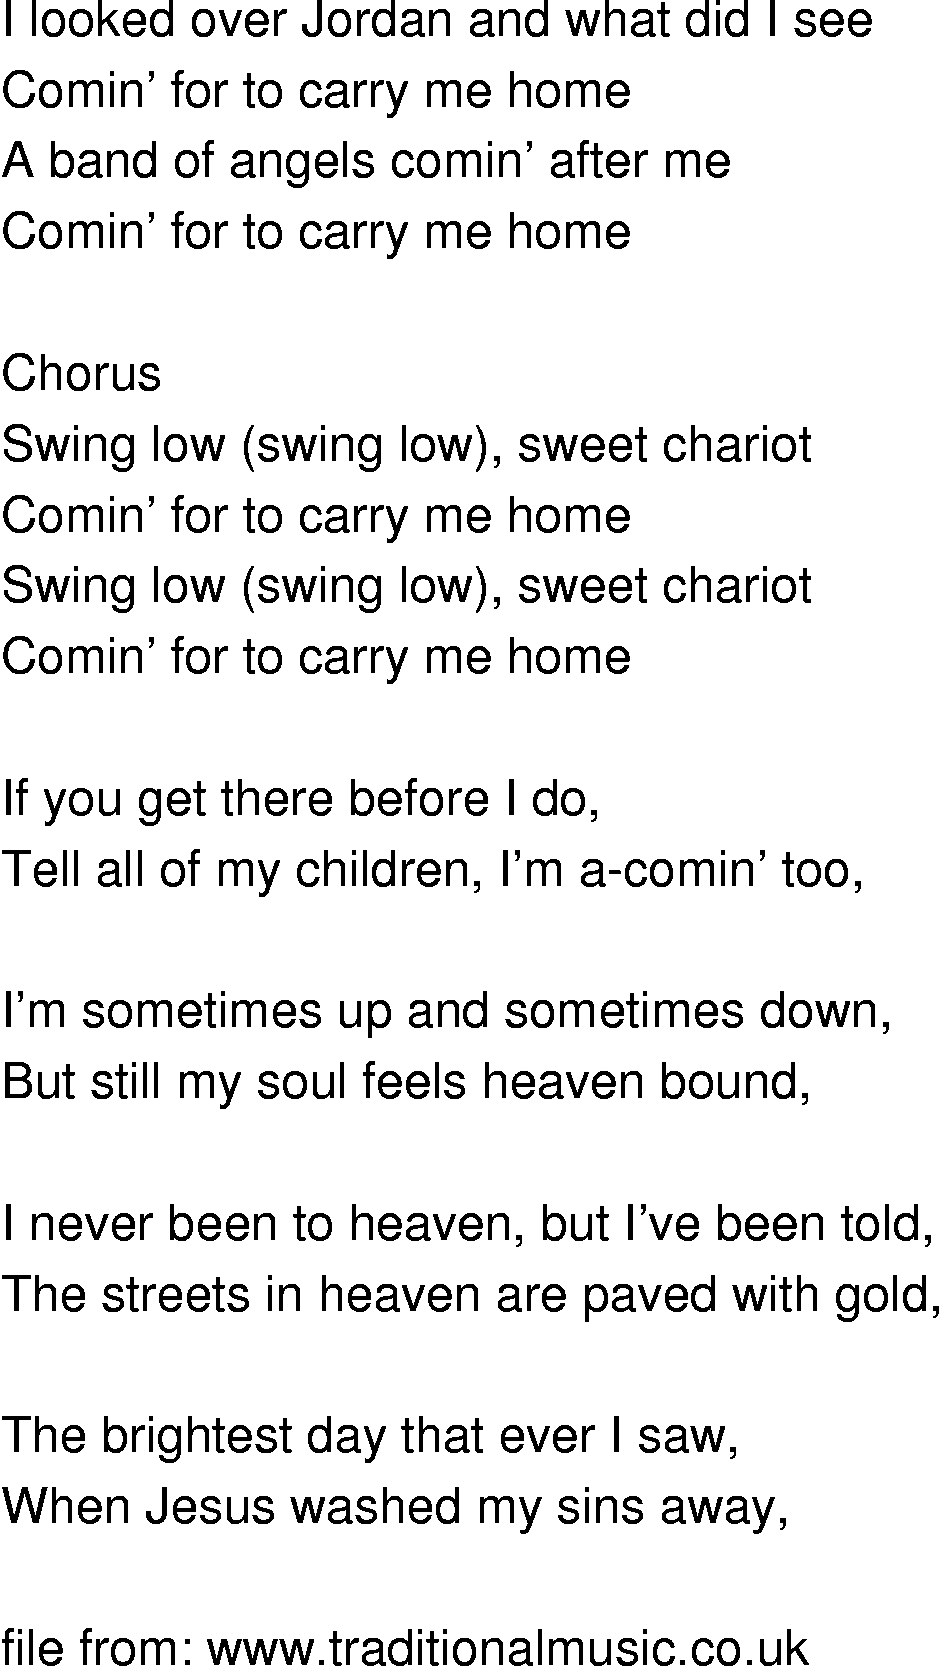 Old-Time (oldtimey) Song Lyrics - swing low sweet chariot